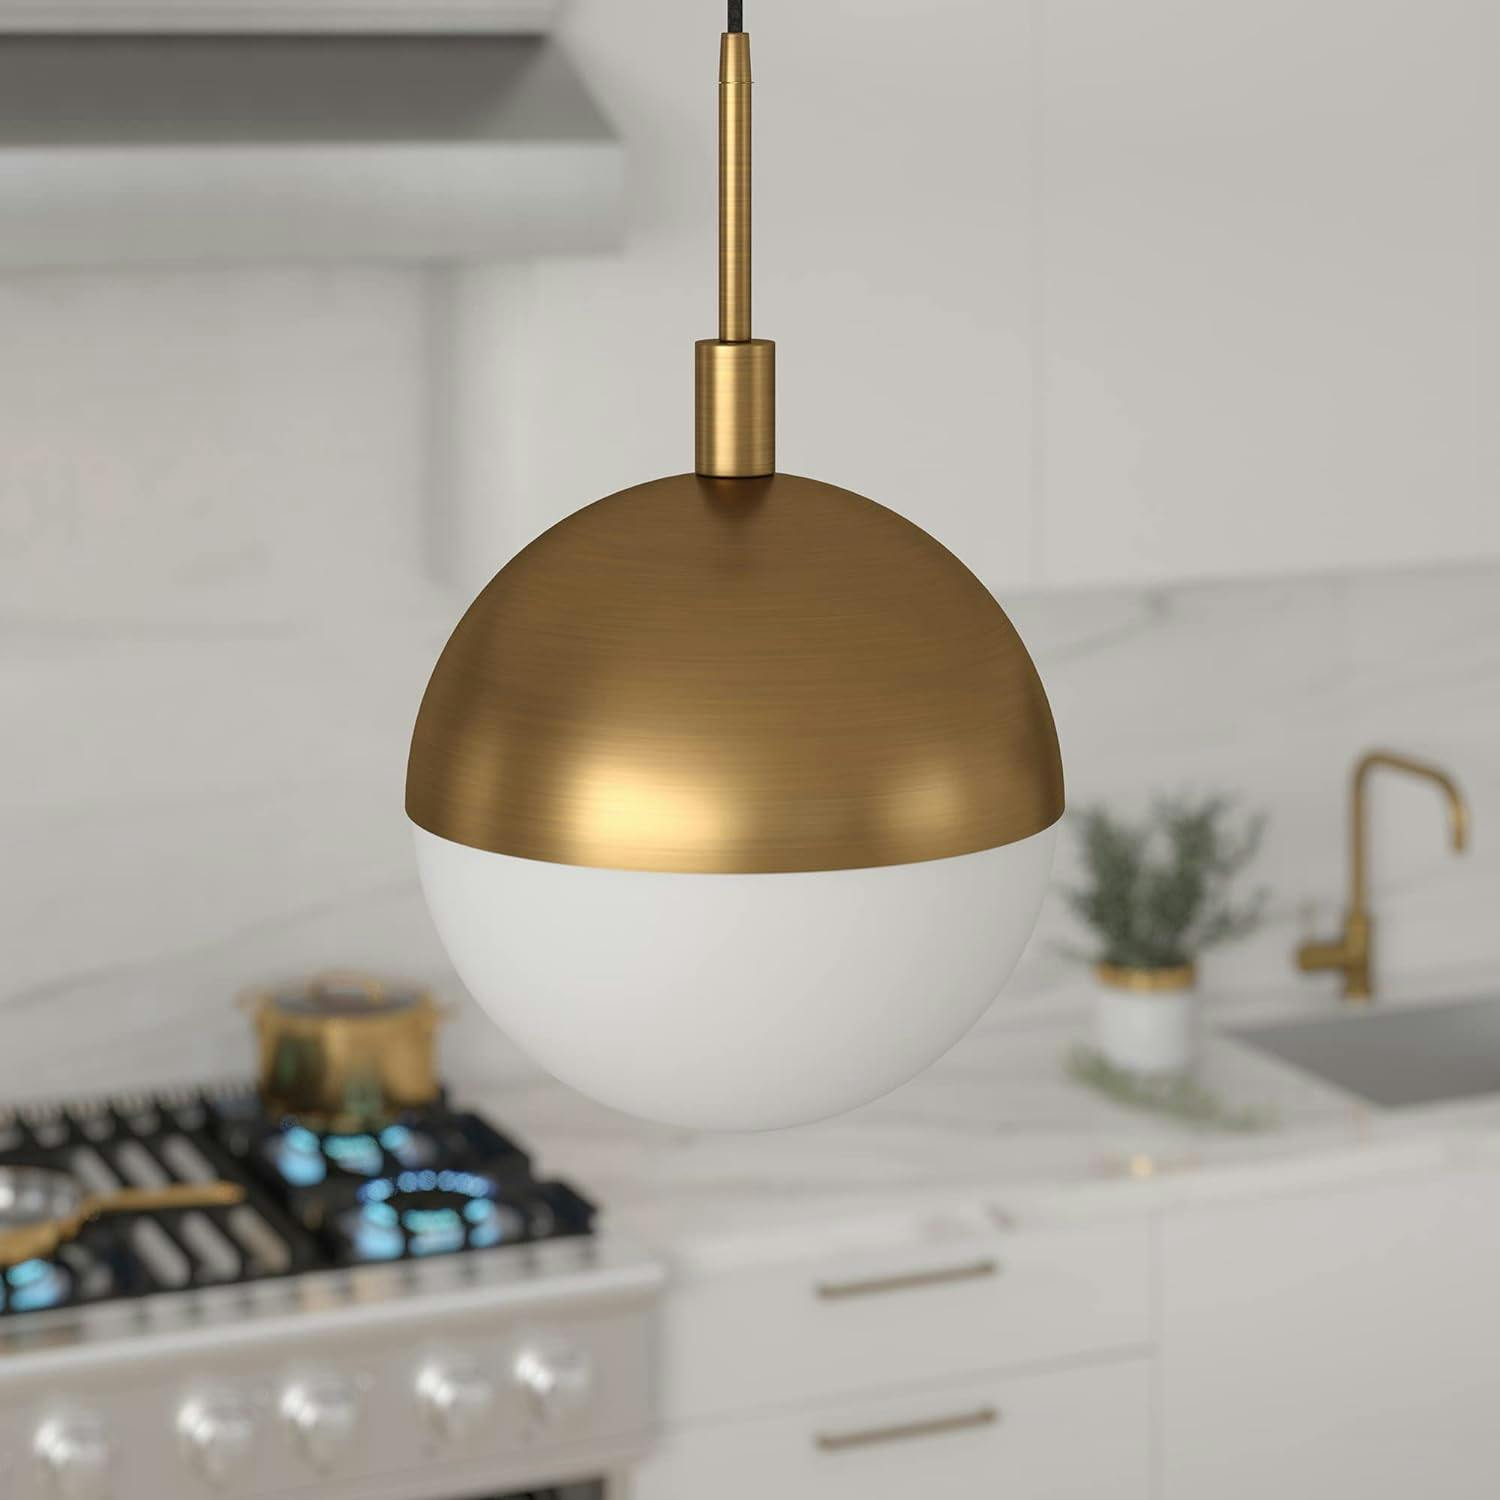 Orb Brushed Brass 12" Globe Pendant with Frosted Glass Shade